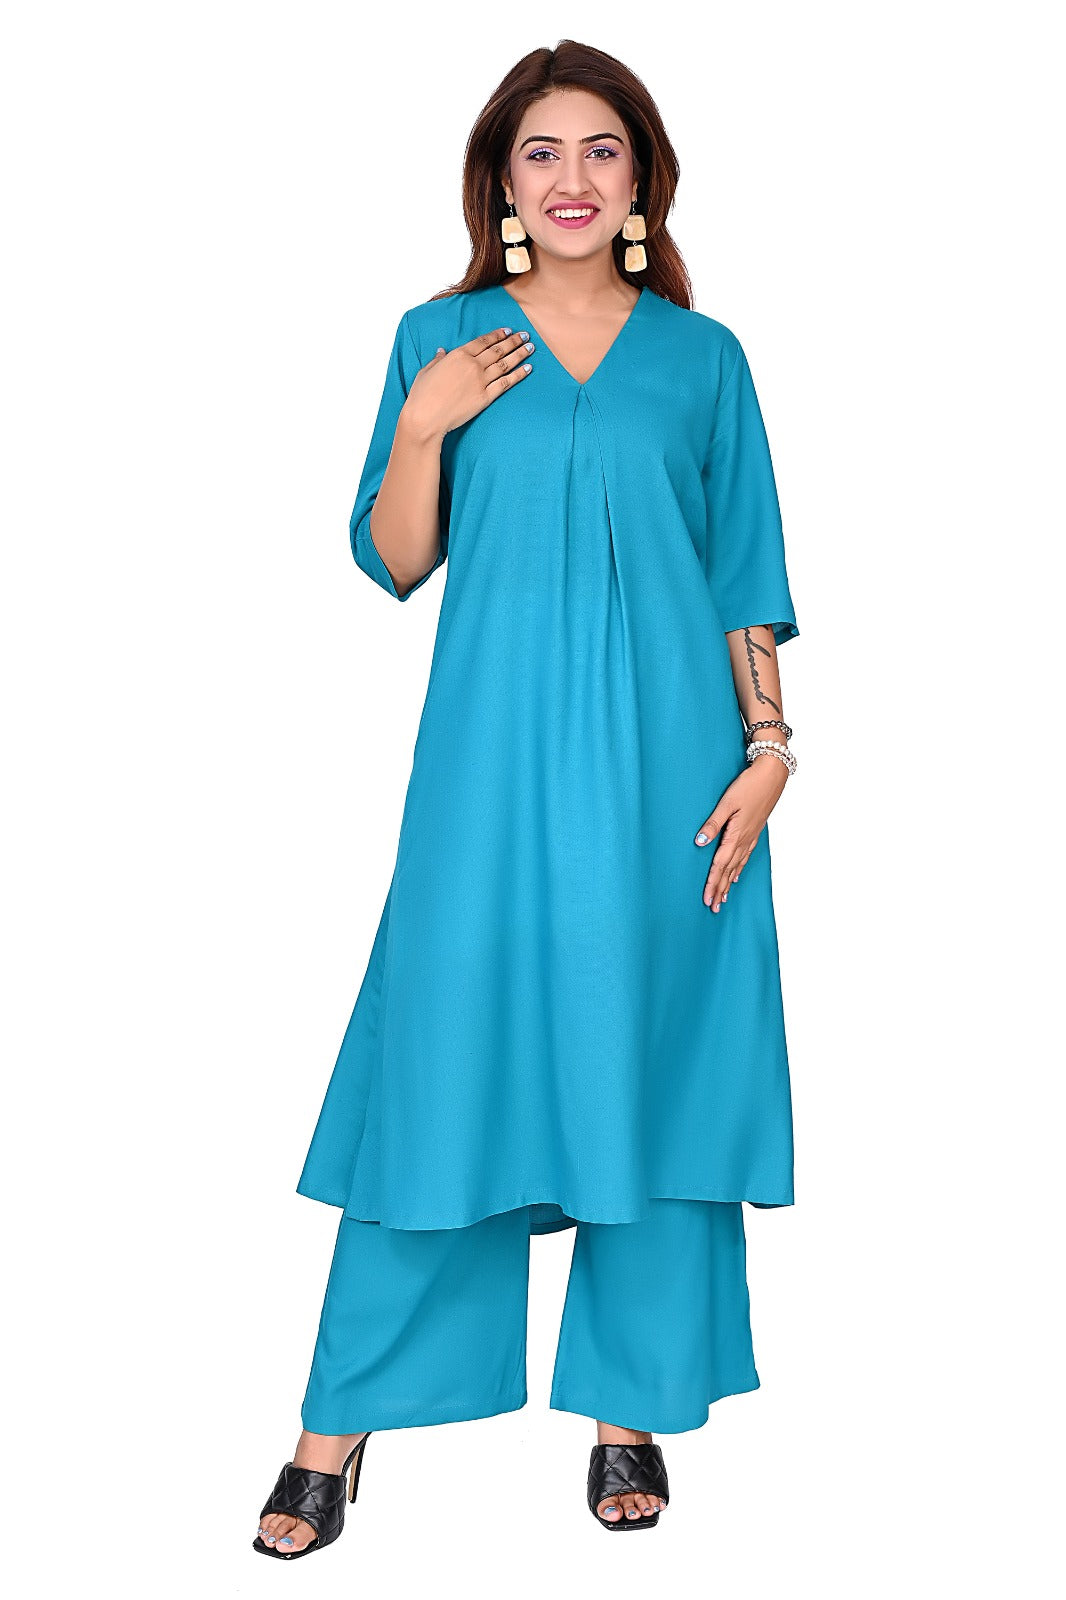 Nirmal online Rayon Premium quality fabric co-ord set kurti for Women in Teal blue colour